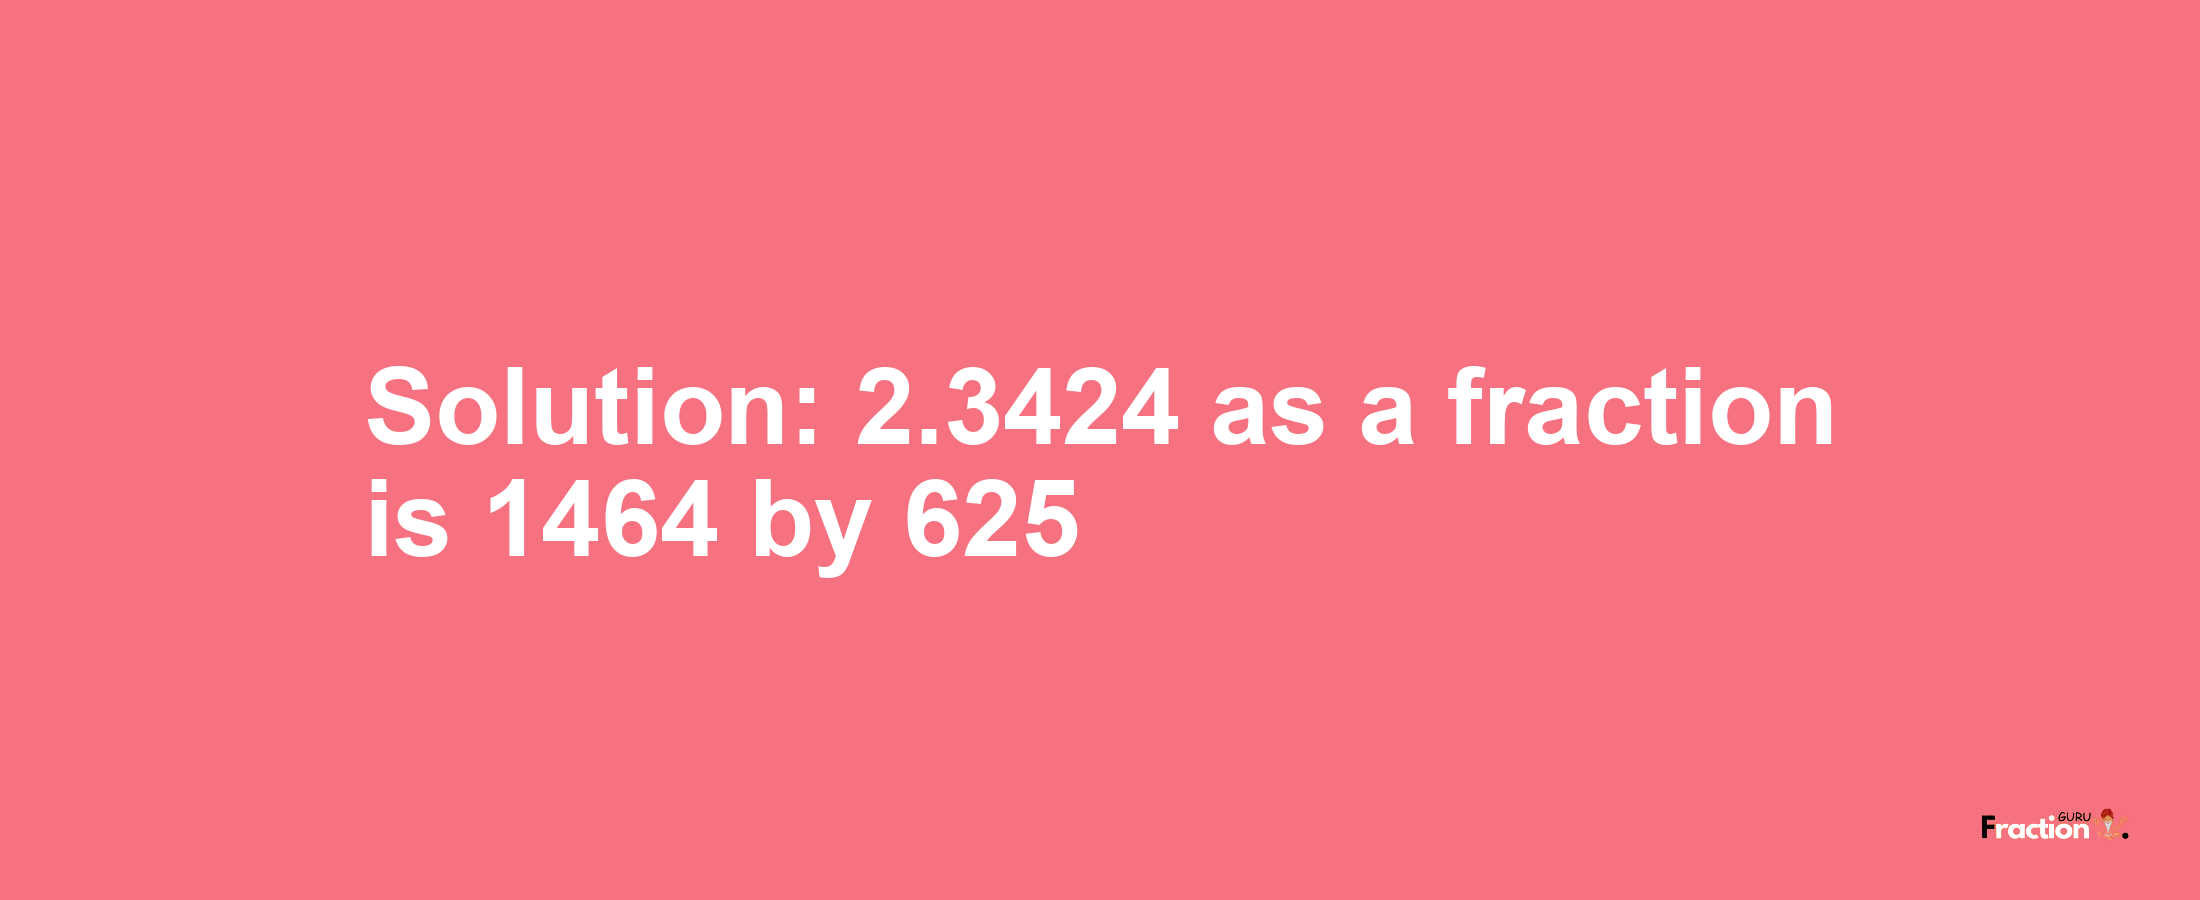 Solution:2.3424 as a fraction is 1464/625